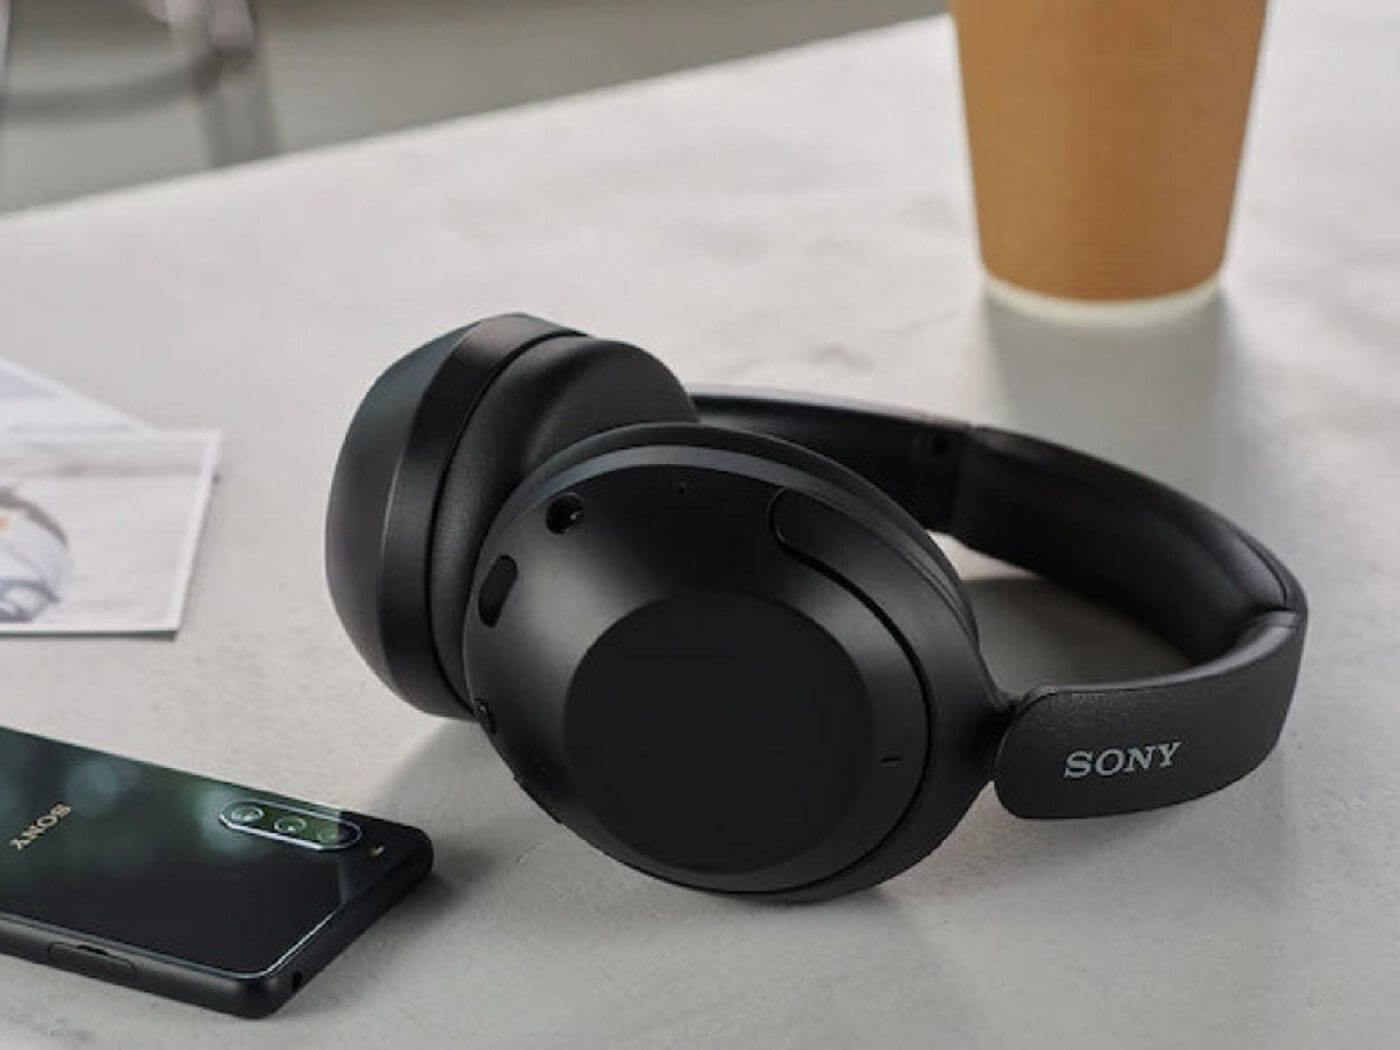 Sony WF-C500 Wireless Headphones - Can be better - The Tech Revolutionist